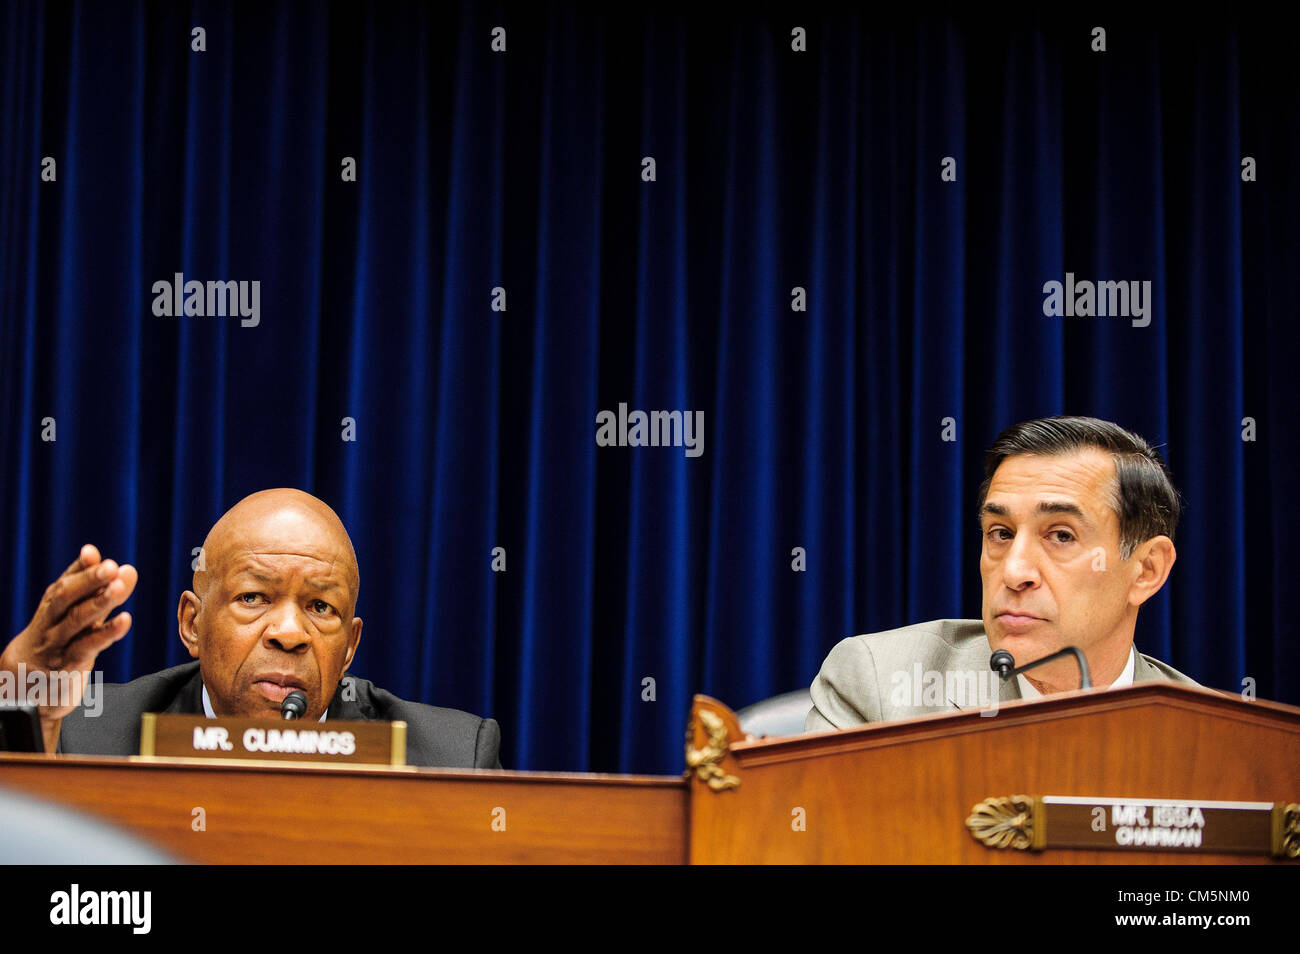 Oct. 10, 2012 - Washington, District of Columbia, U.S. - Rep. Elijah Cummings (R-MD) and Committee Chairman DARYL ISSA (R-CA)  question witnesses during a House Oversight and Government Reform Committee during a hearing focusing on the security situation in Benghazi leading up to the September 11 attack that resulted in the assassination of U.S. Ambassador to Libya J. Christopher Stevens. (Credit Image: © Pete Marovich/ZUMAPRESS.com) Stock Photo